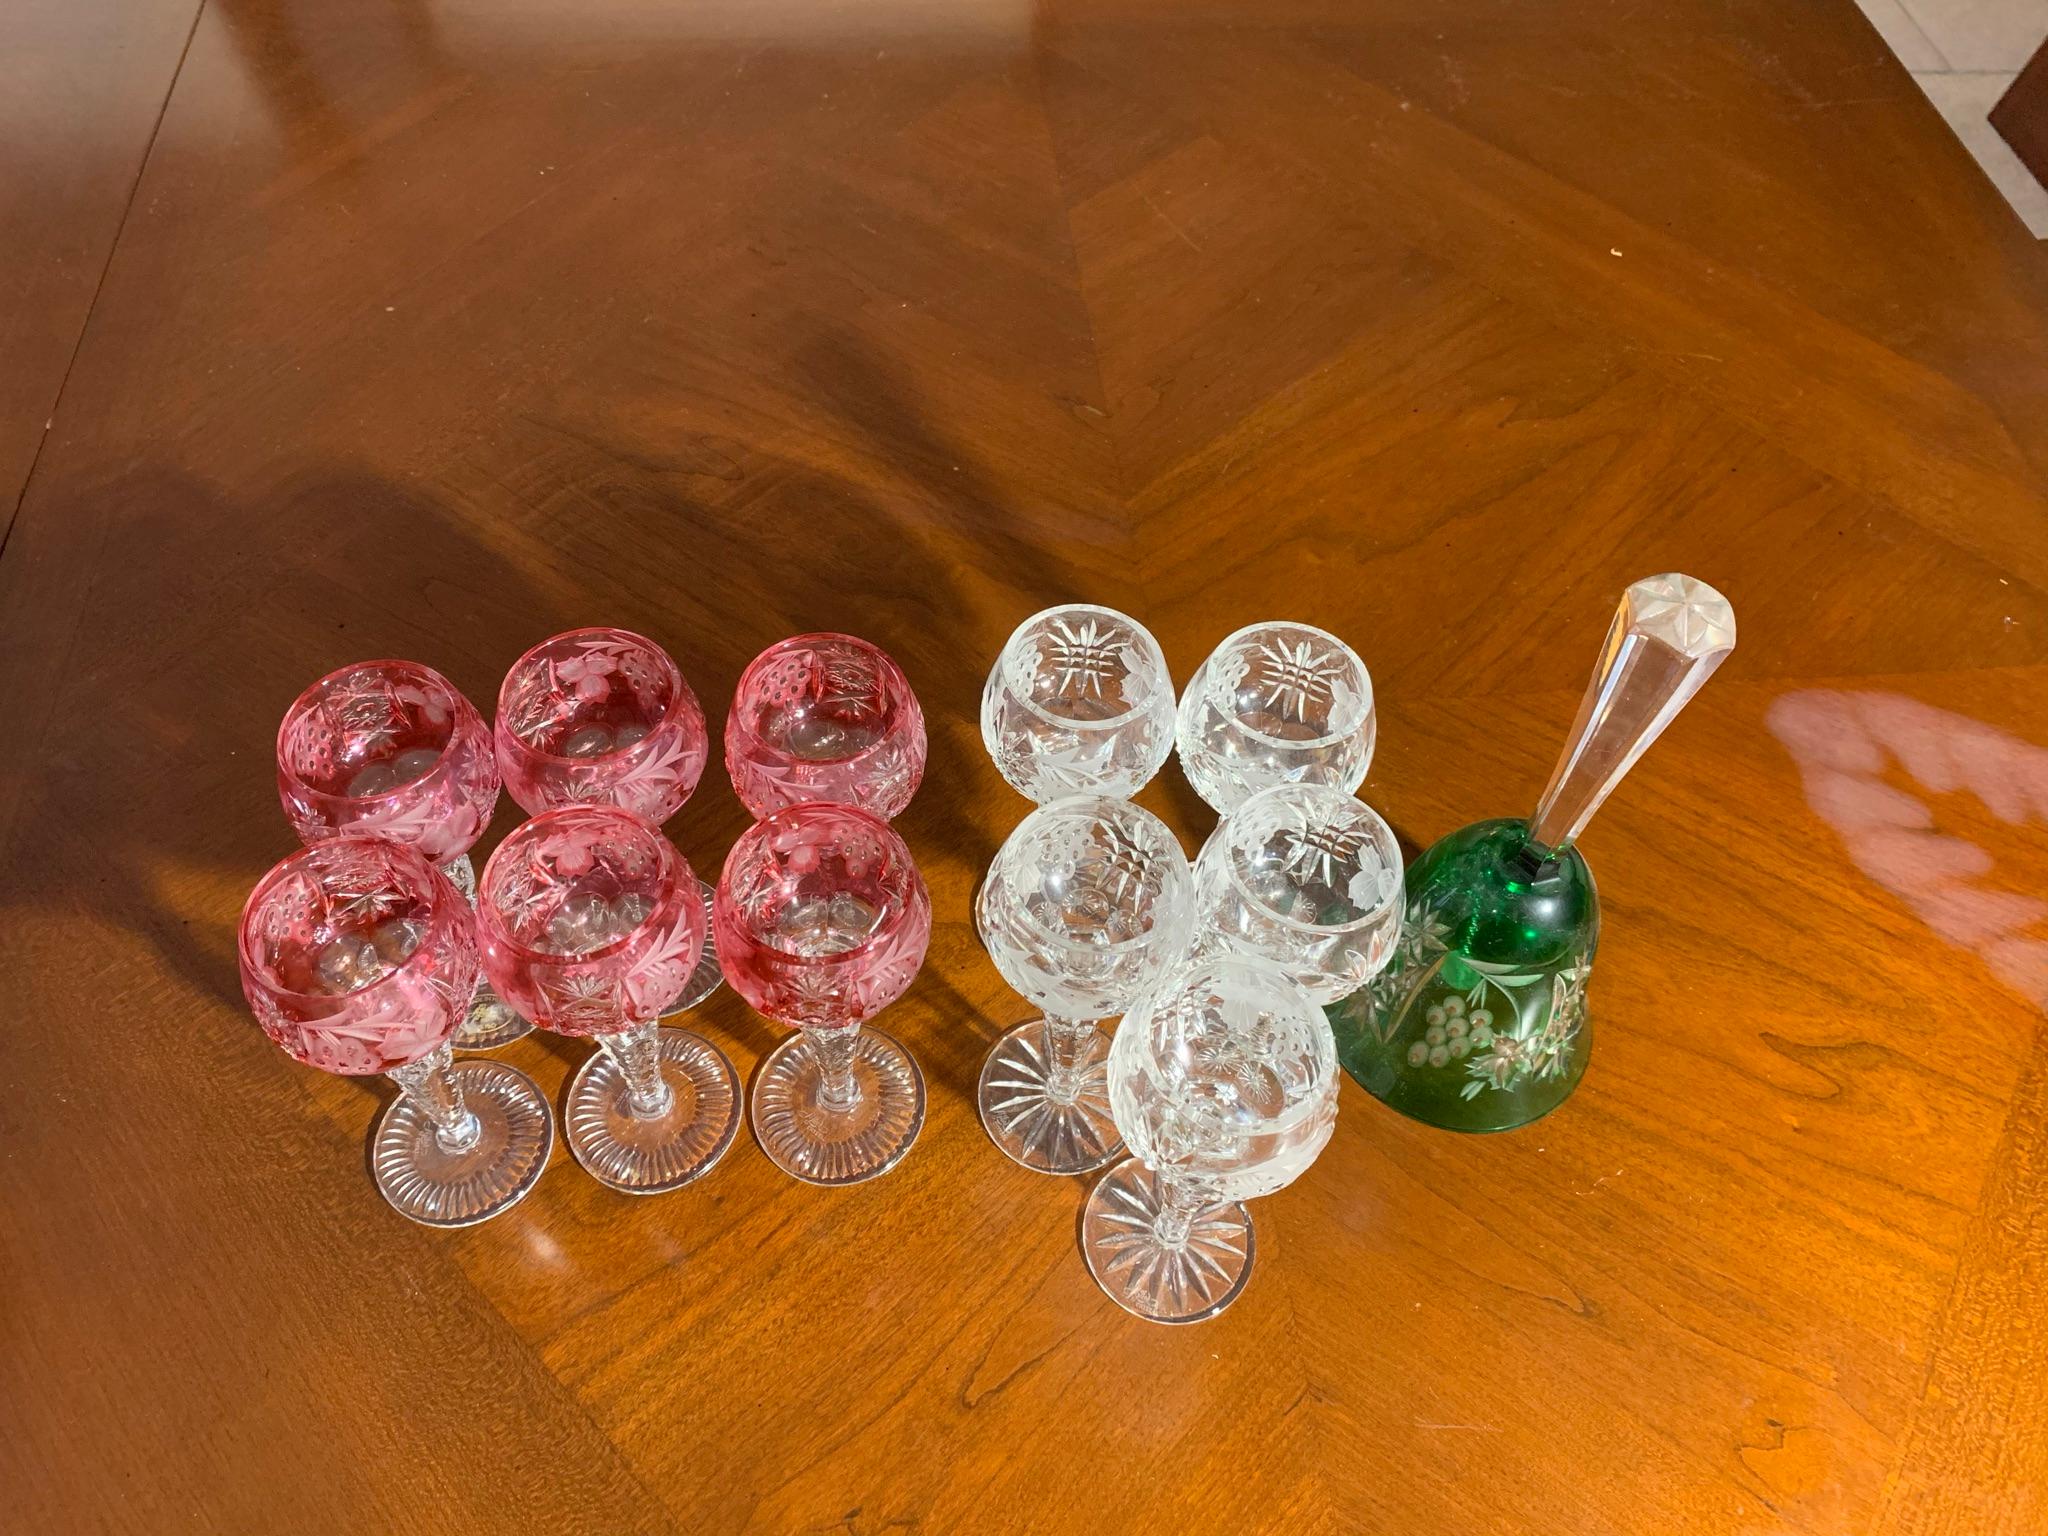 11 Total Ajka Hungarian Crystal Stemware with Matching Bell